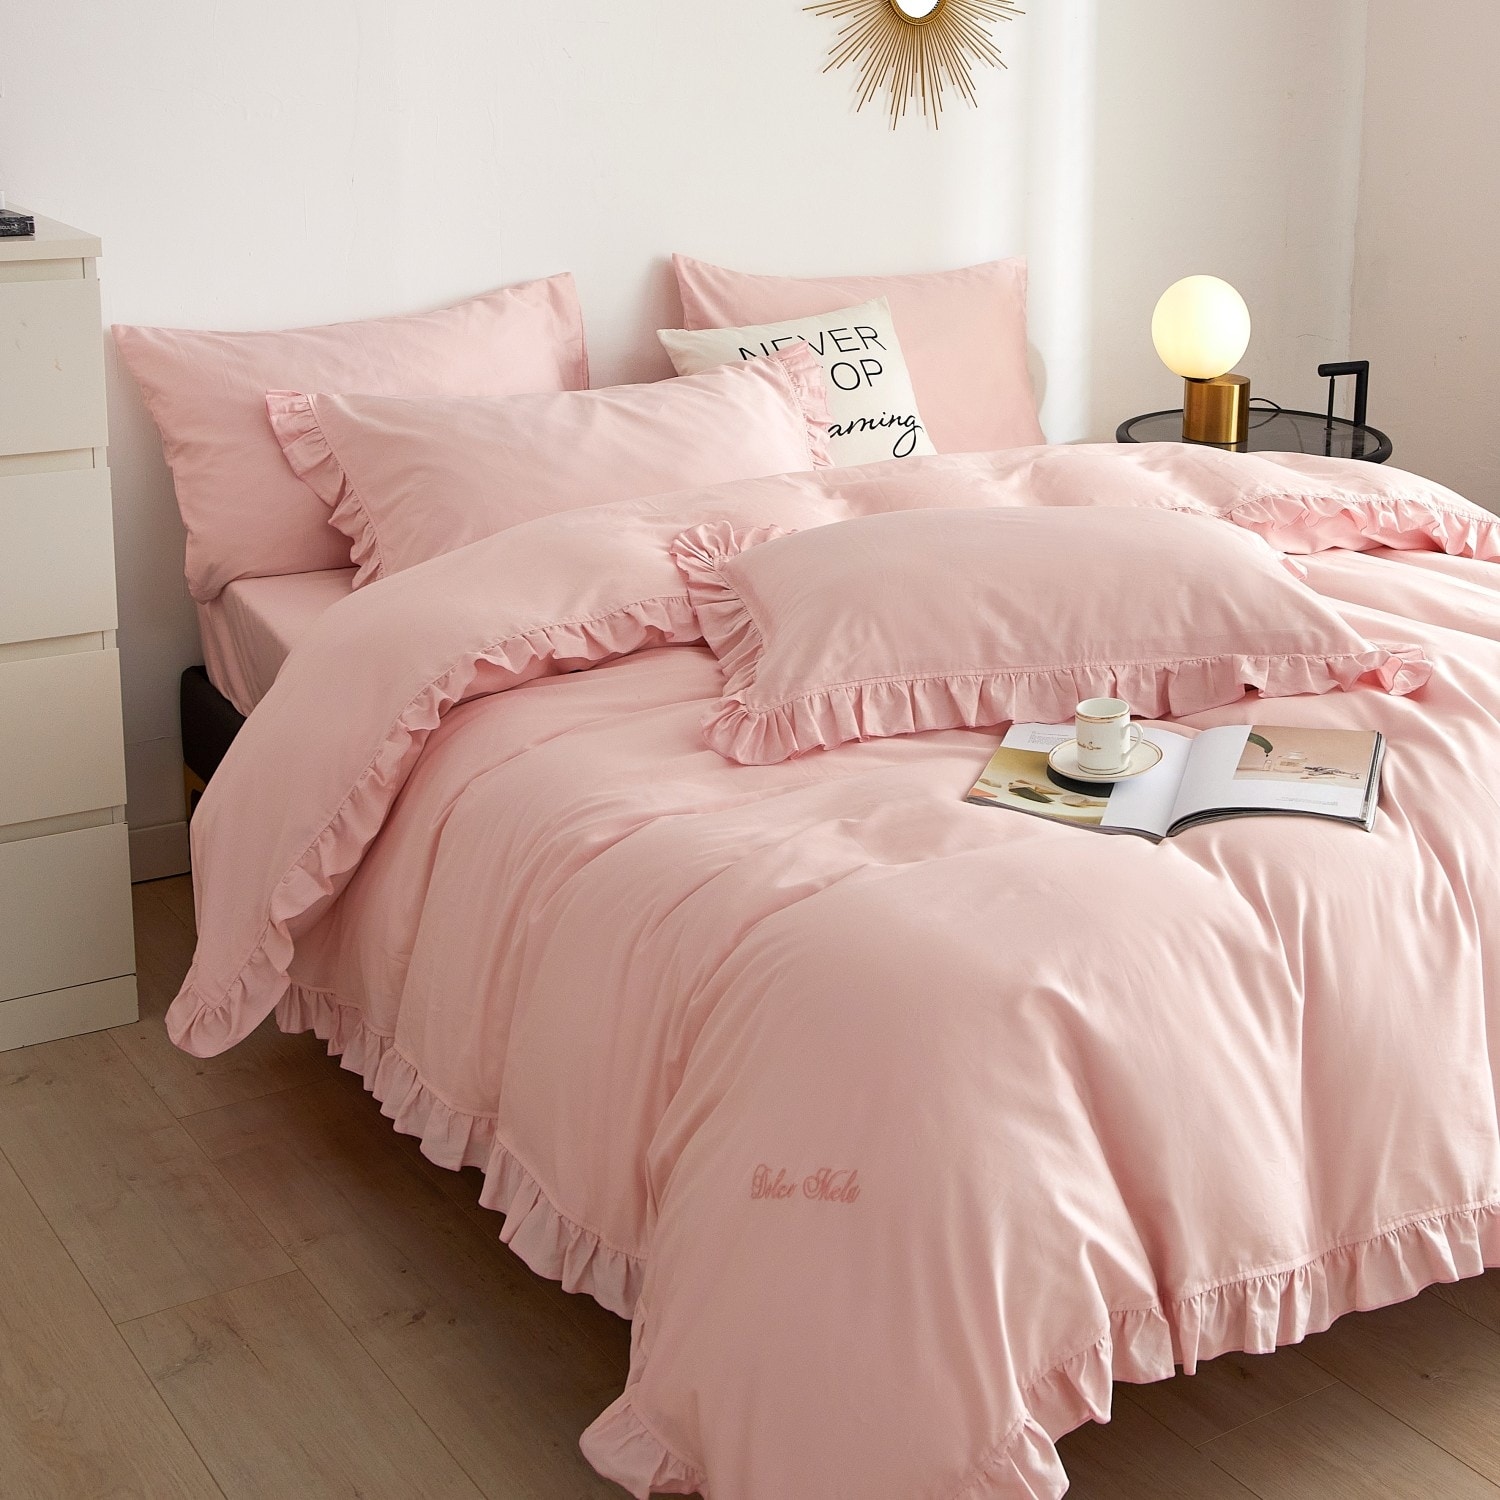 Pink Ruffle Duvet Cover, Fitted Bedding Set, 100% Cotton - On Sale - Bed  Bath & Beyond - 32531445